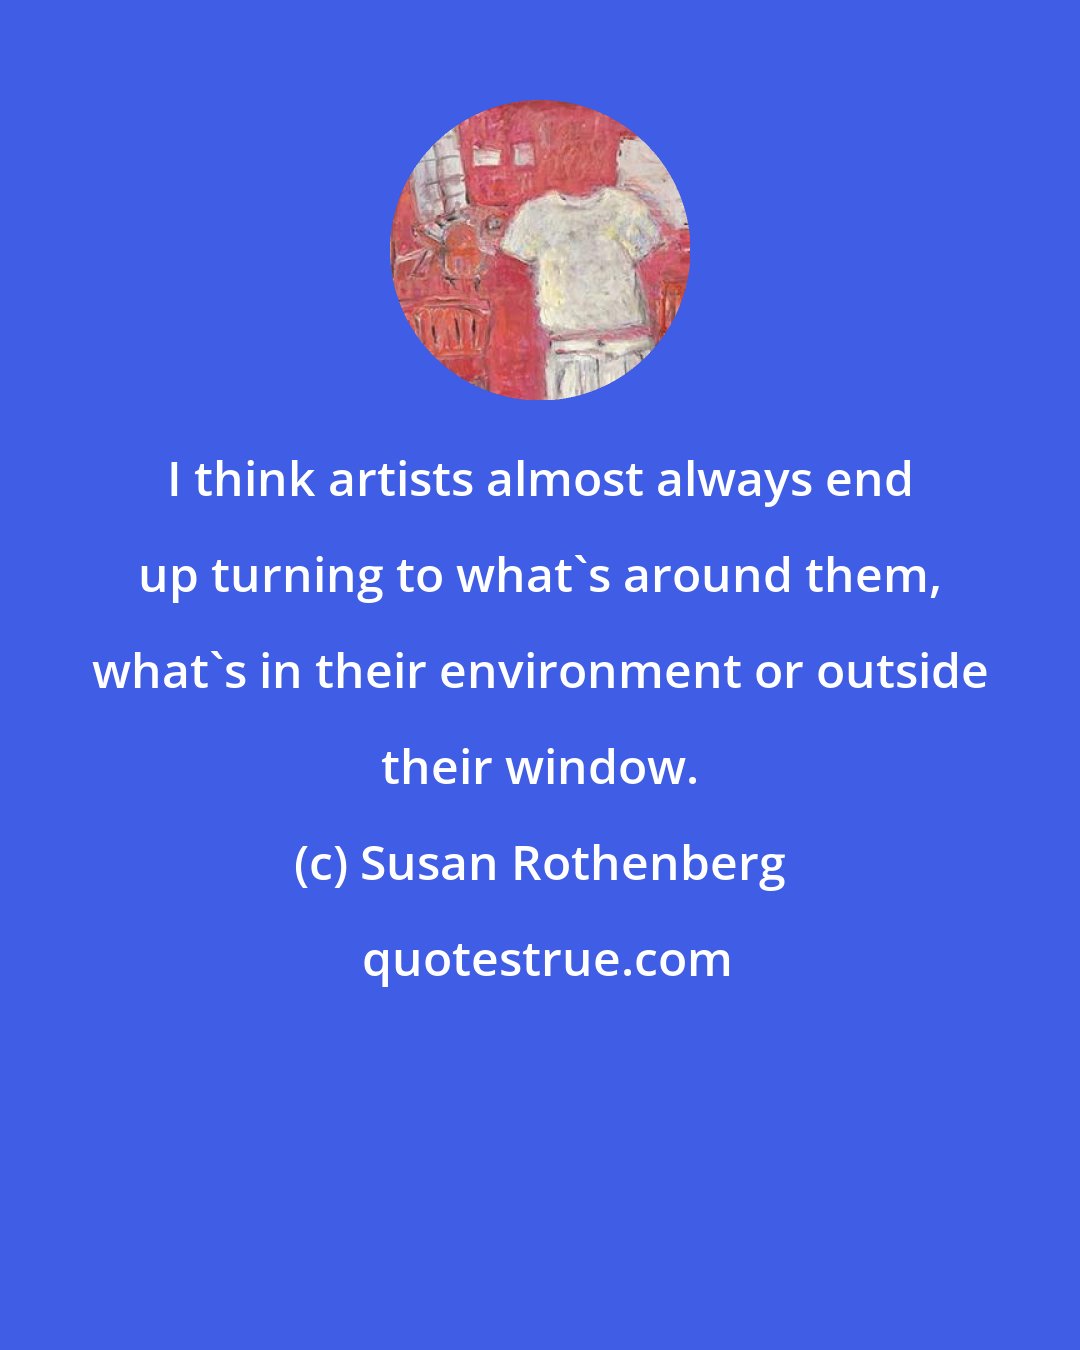 Susan Rothenberg: I think artists almost always end up turning to what's around them, what's in their environment or outside their window.